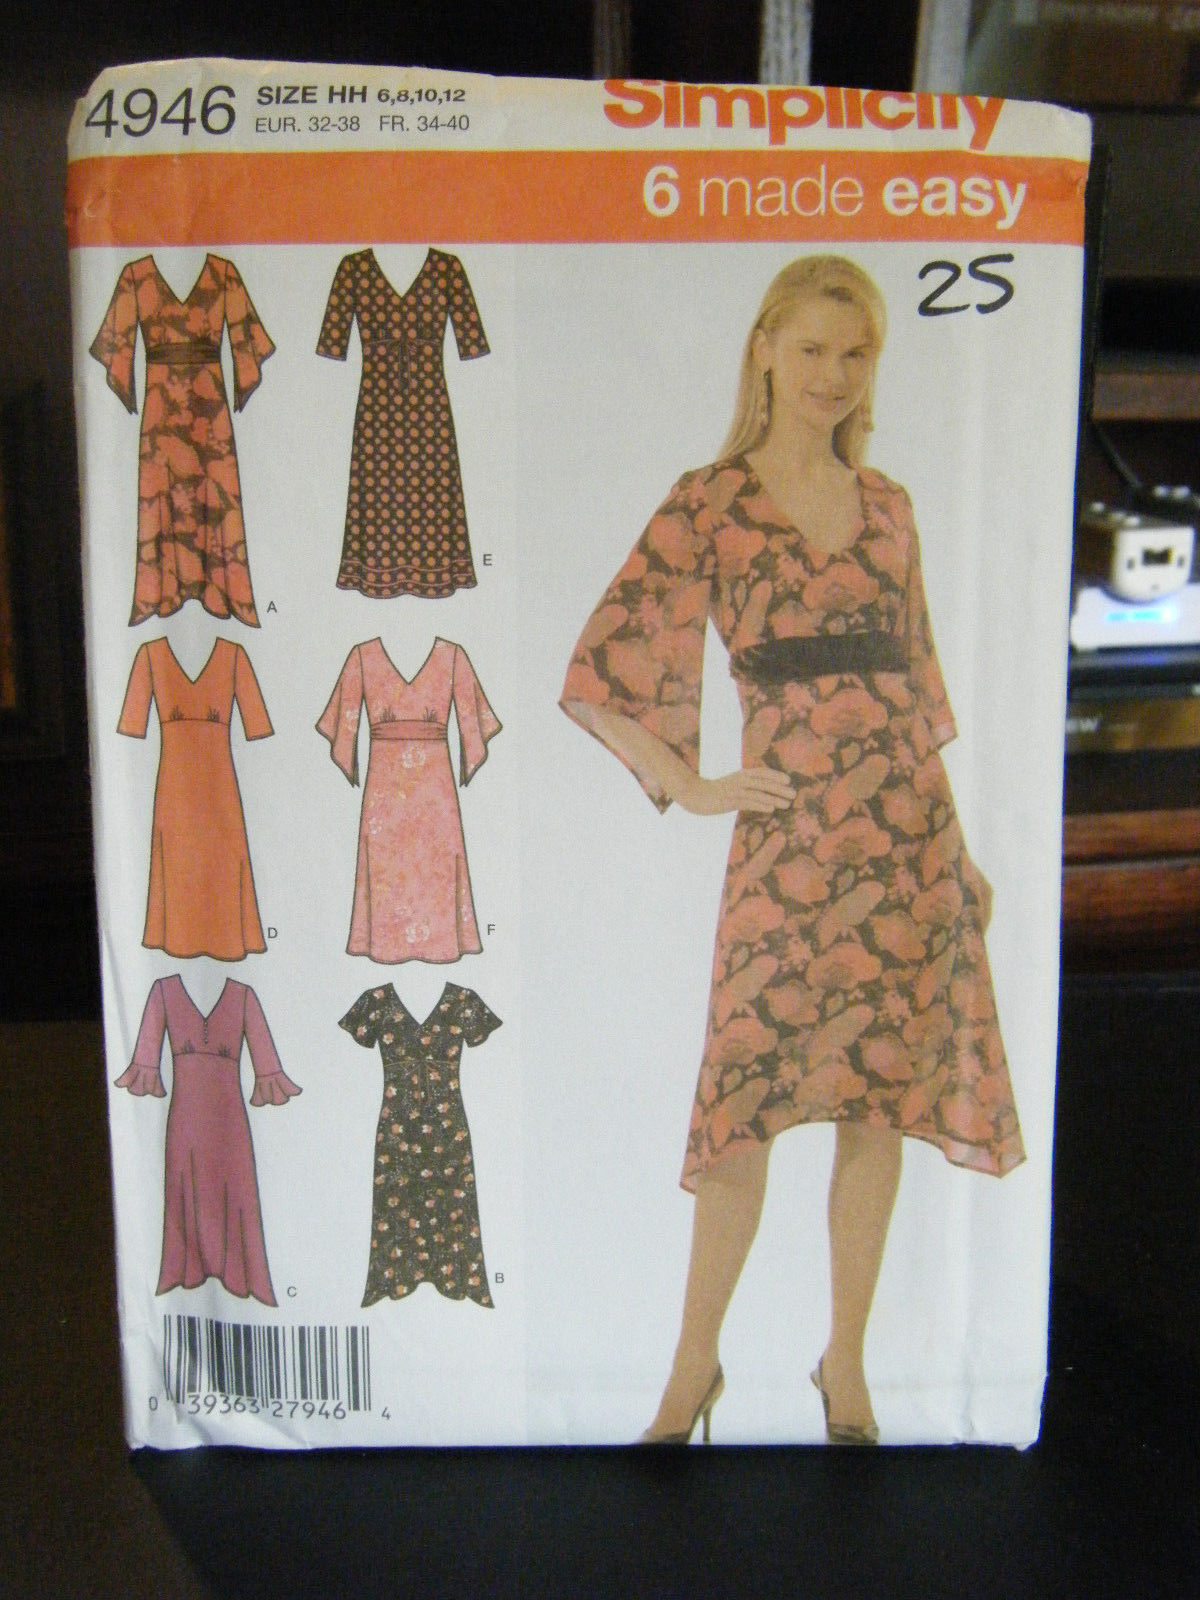 Primary image for Simplicity 4946 Misses Dresses Pattern - Size 6/8/10/12